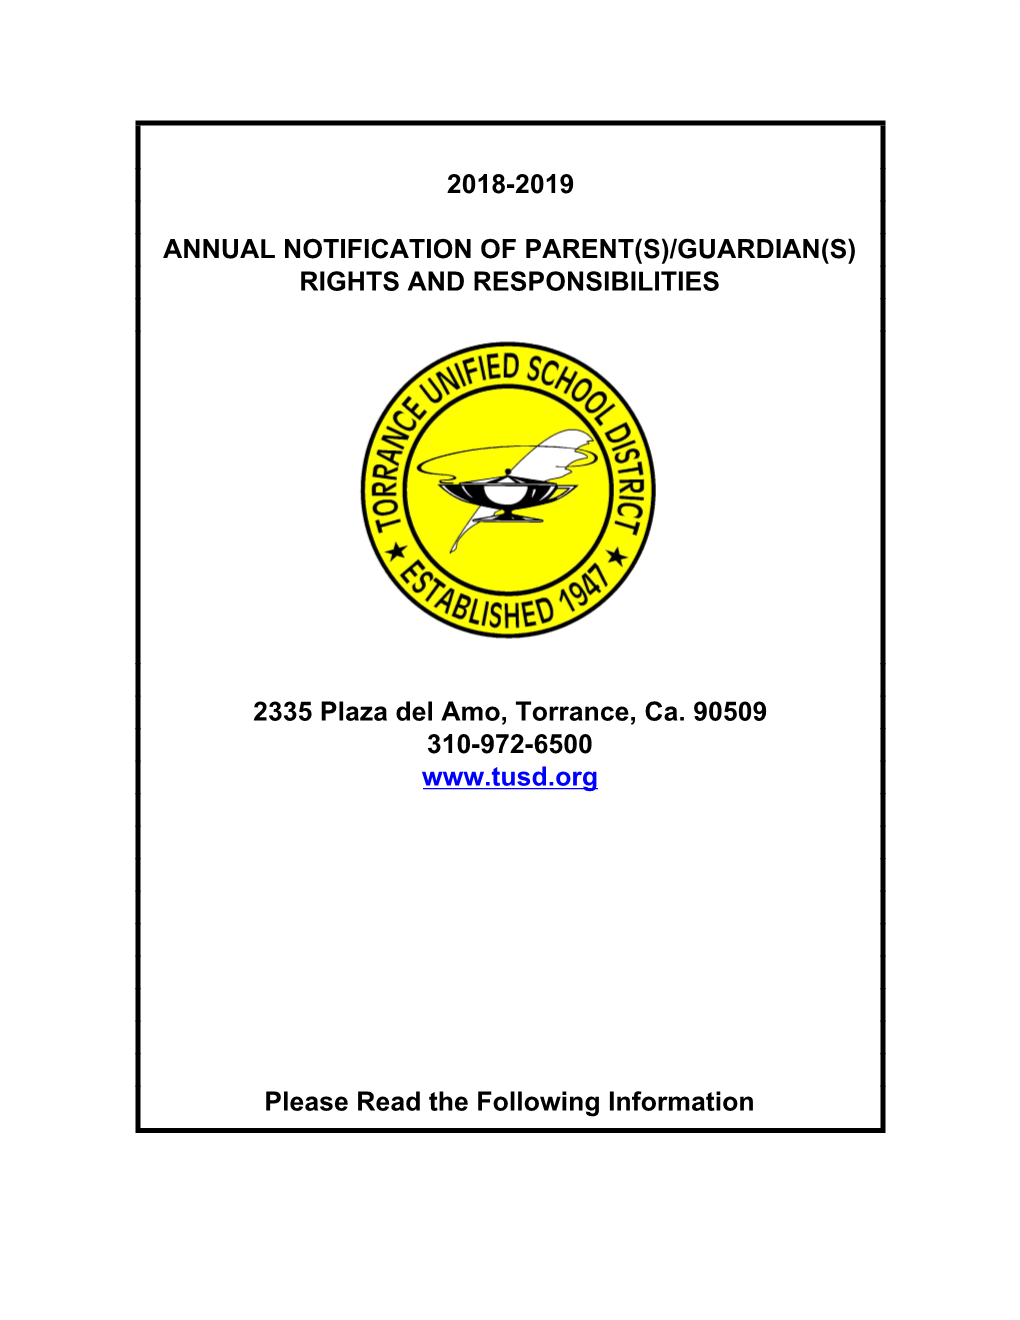 2018-2019 ANNUAL NOTIFICATION of RIGHTS and RESPONSIBILITIES Torrance Unified School District